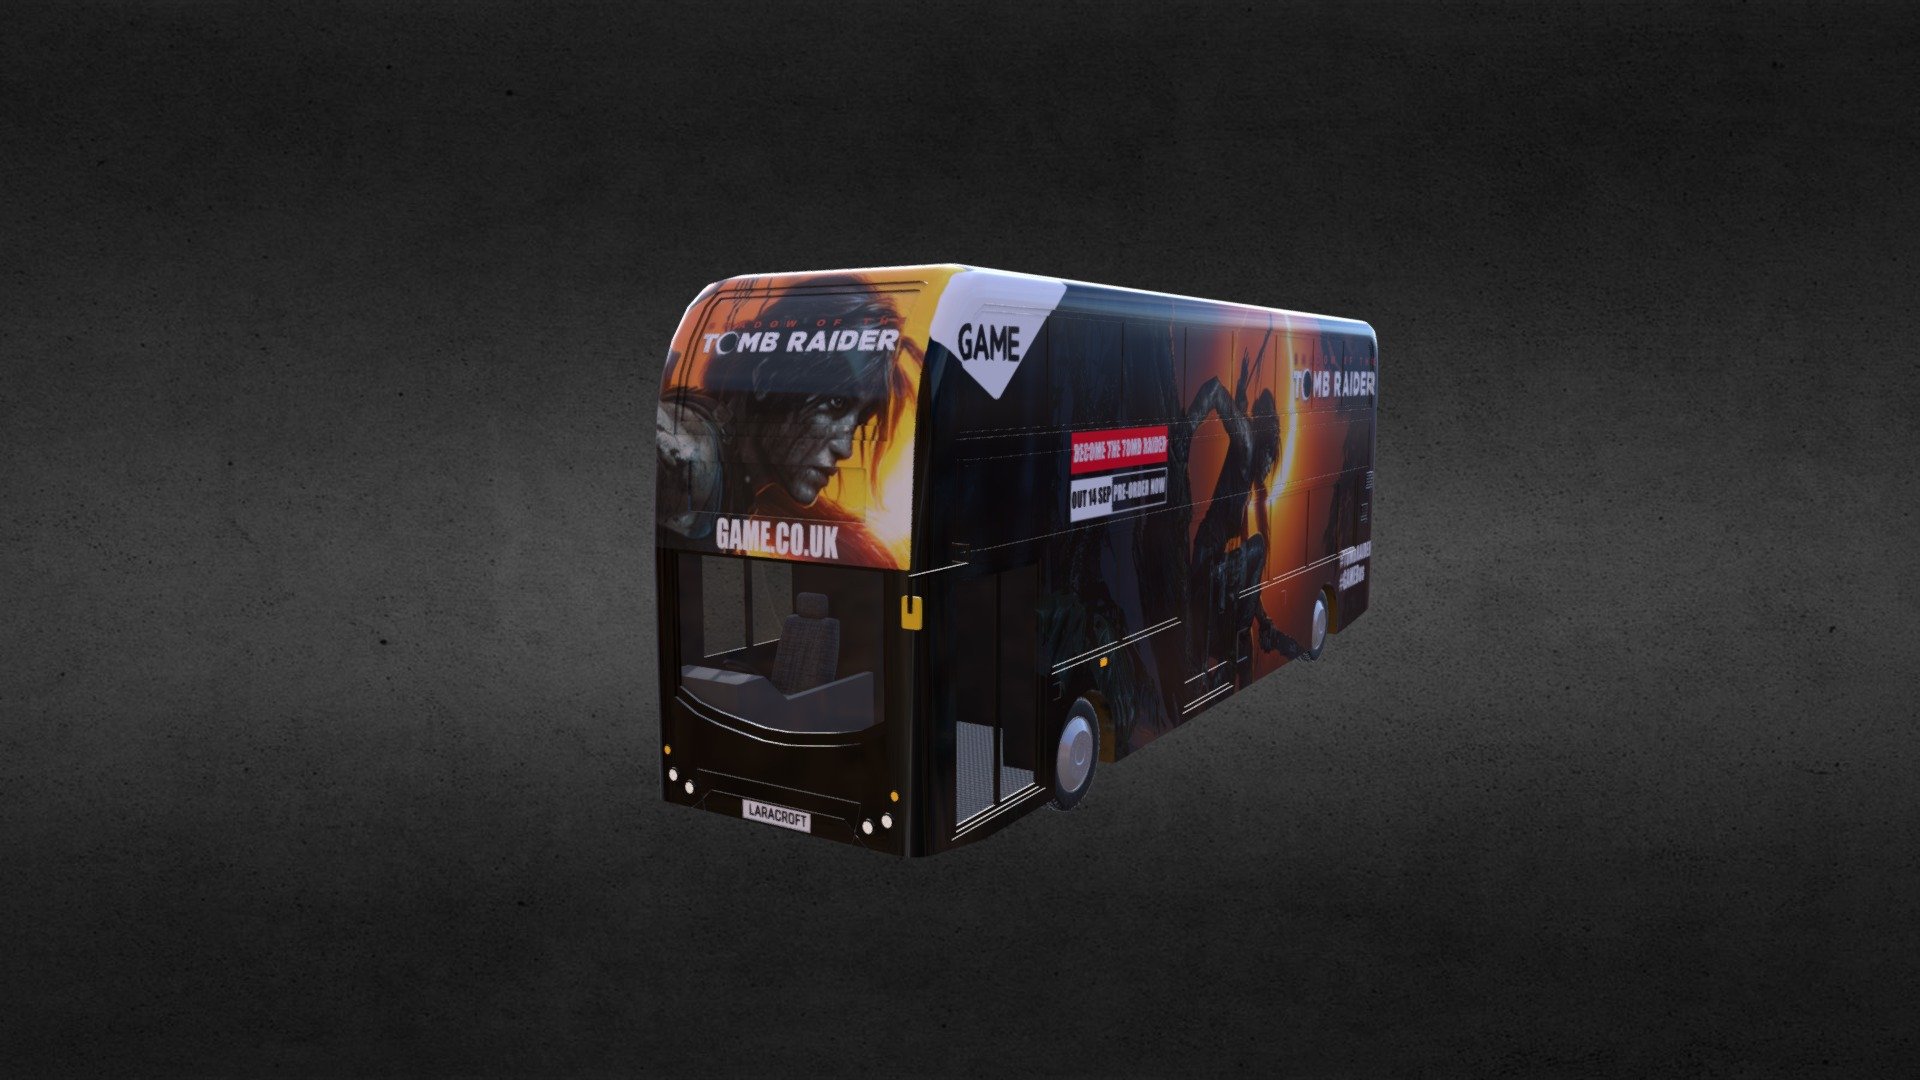 Modeled based on Fragers tomb raider bus which will be debuting at Insomnia!
Game asset for an upcoming project 3d model